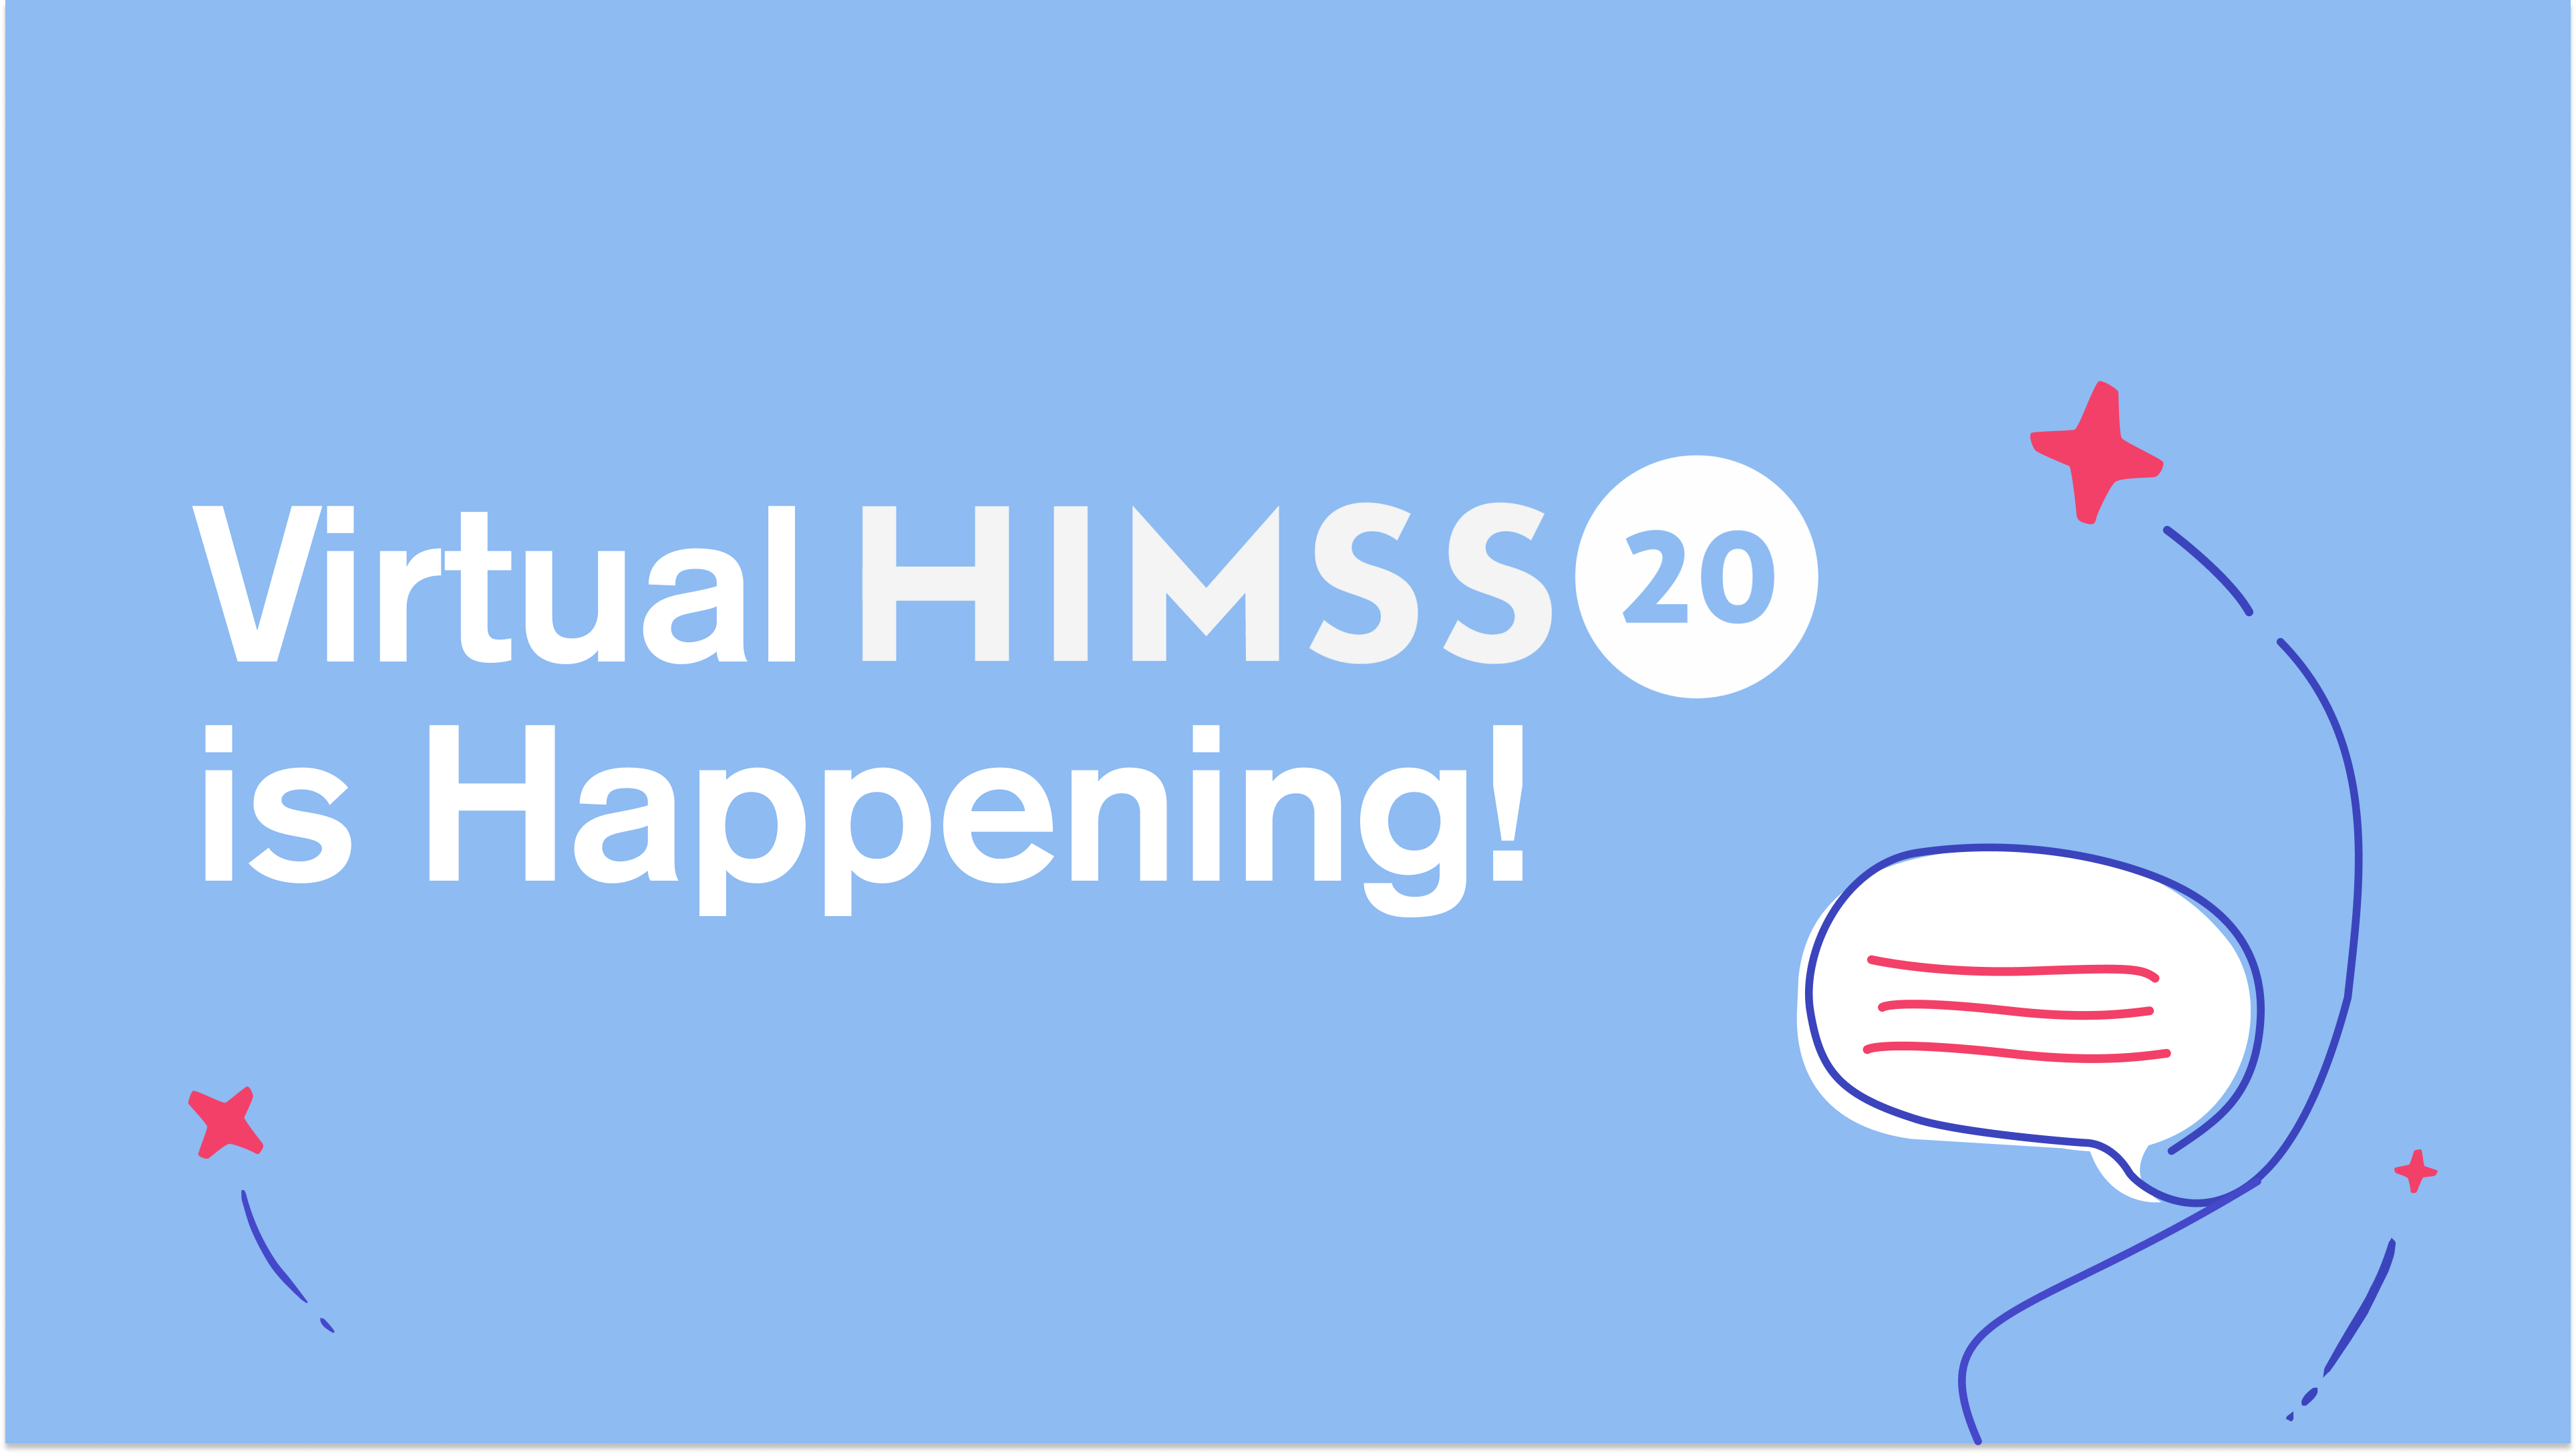 Virtual HIMSS20 is Happening! Let’s Look Back at Key Quotes from Healthcare’s Top CIOs